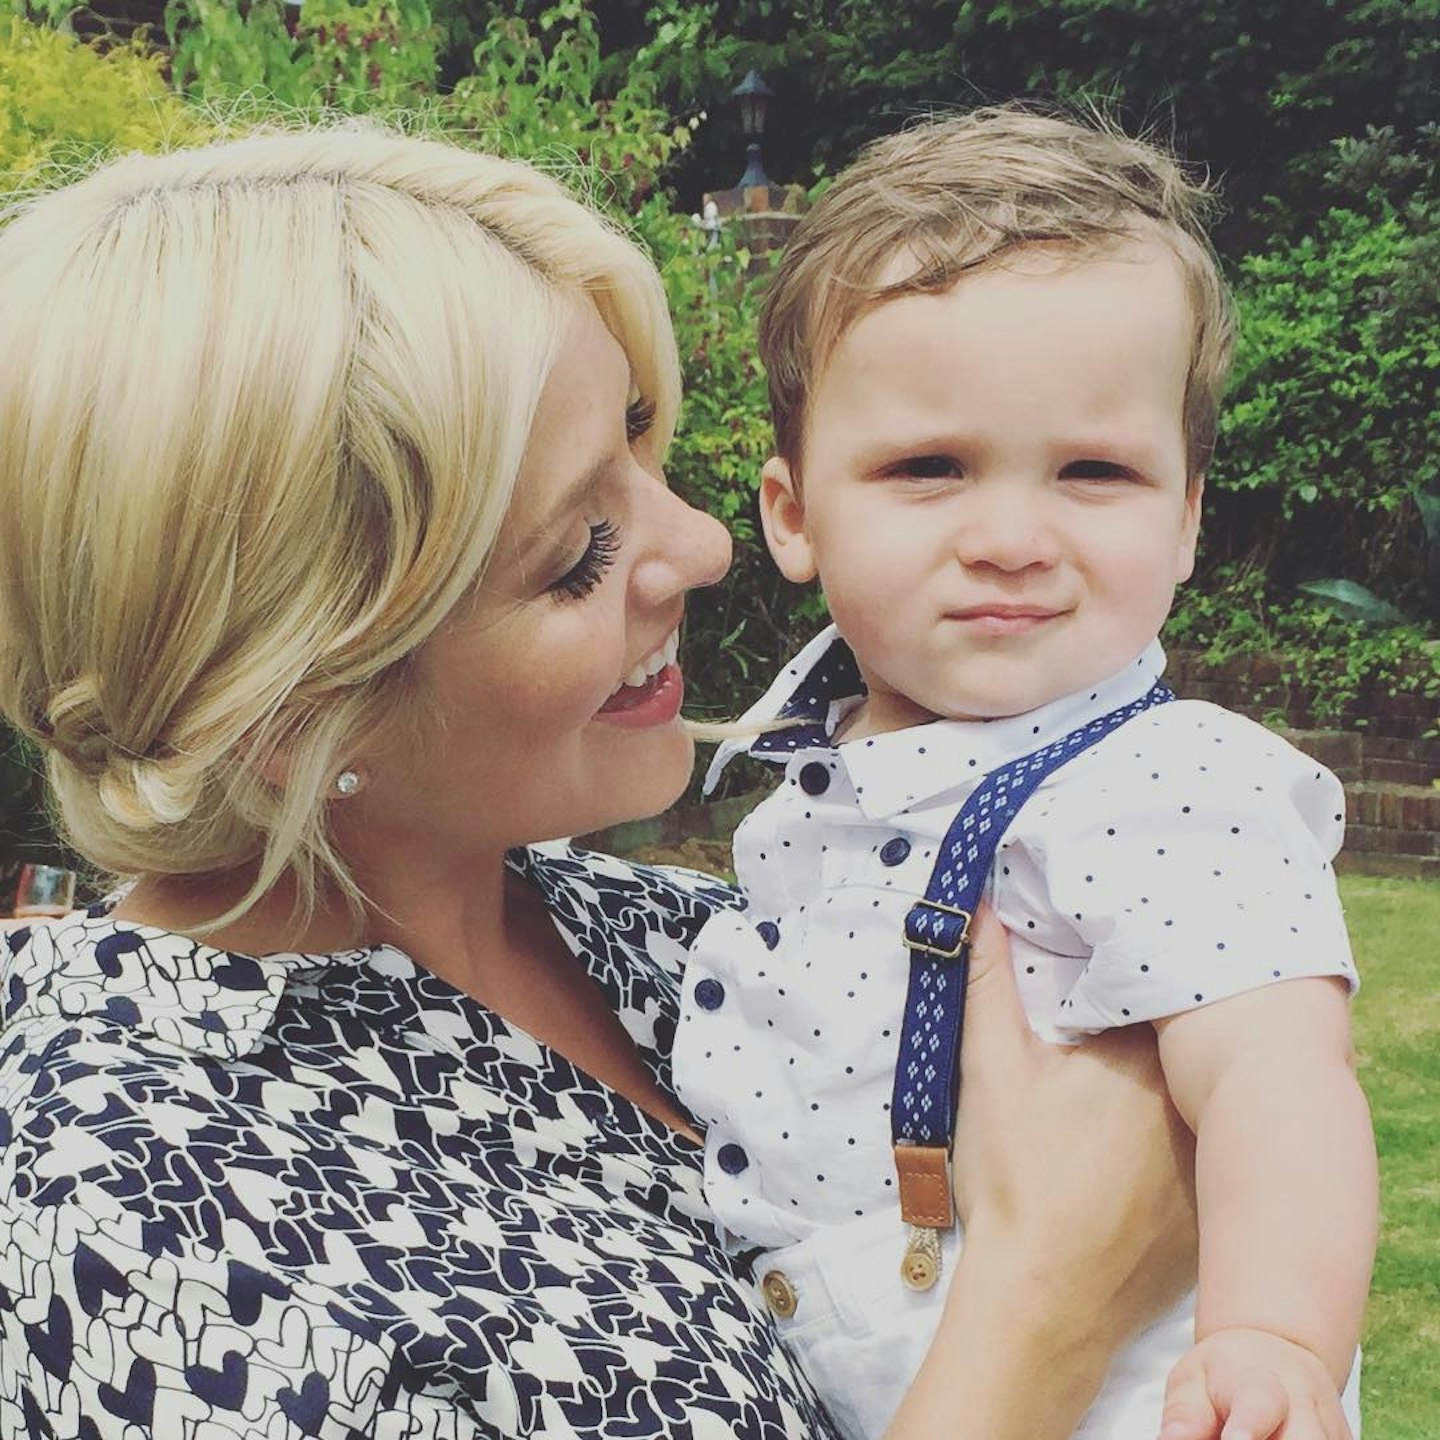 holly-willoughby-birthday-photo-family-children